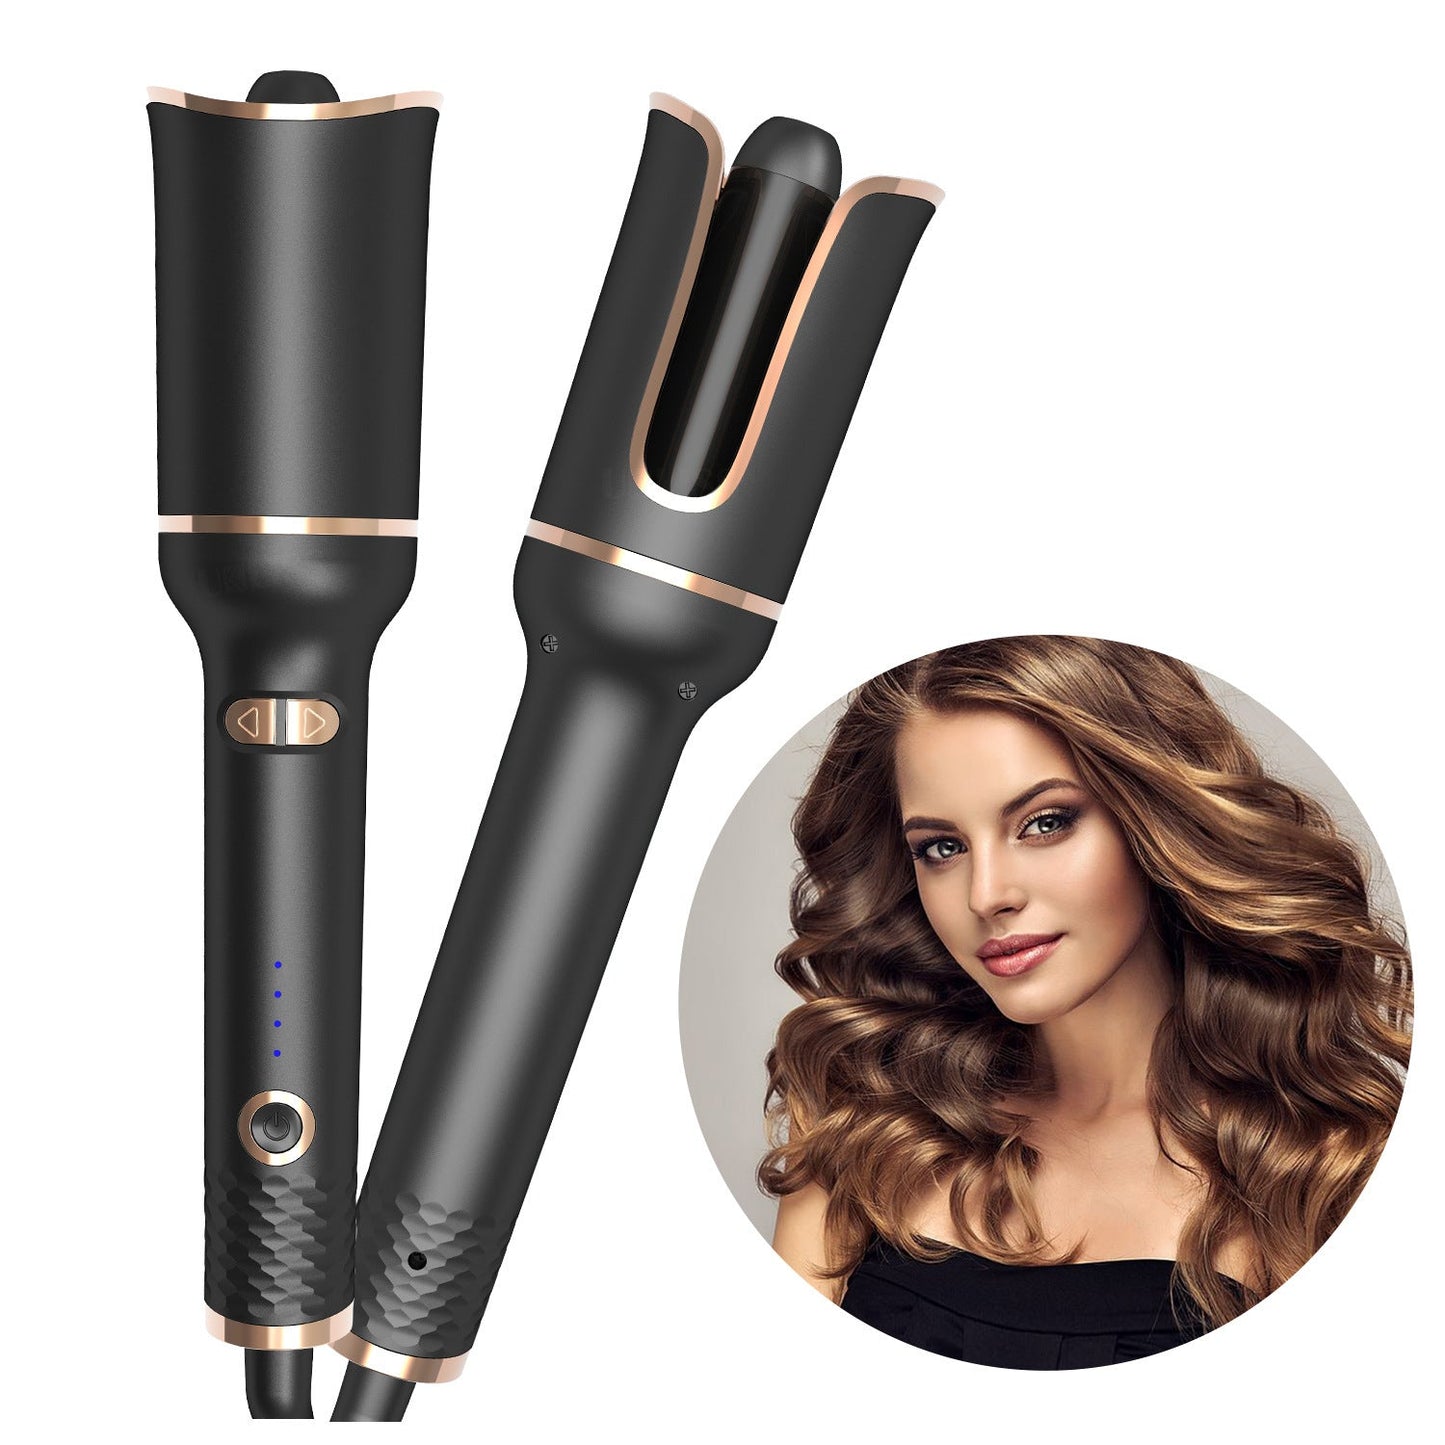 Spin-n-Curl - Auto-Spin Curling Iron